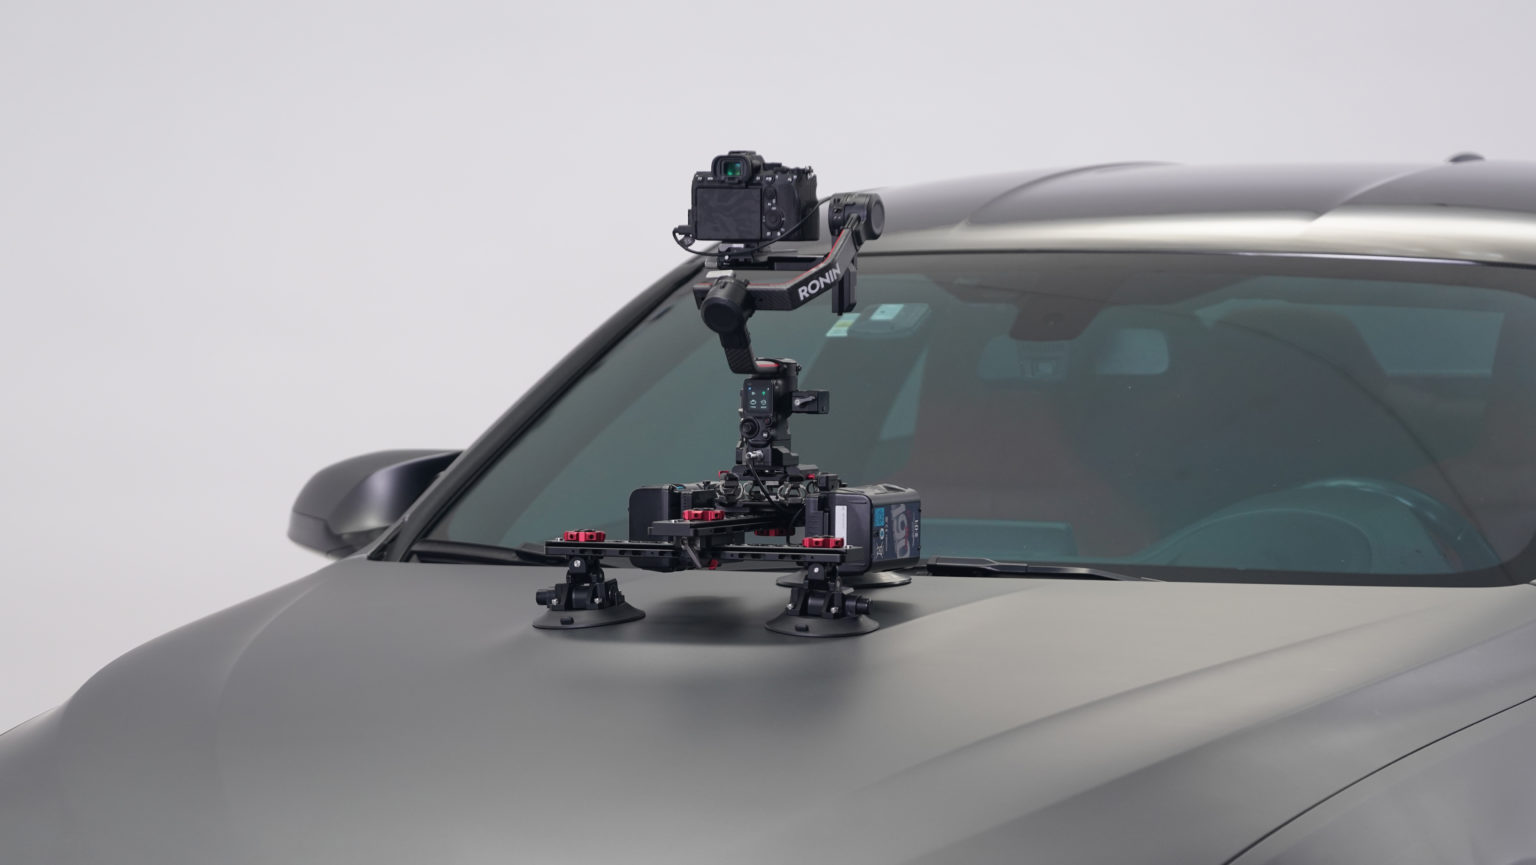 3 Articulating Arm Suction Cup Vehicle Mount for Dslr & Mirrorless